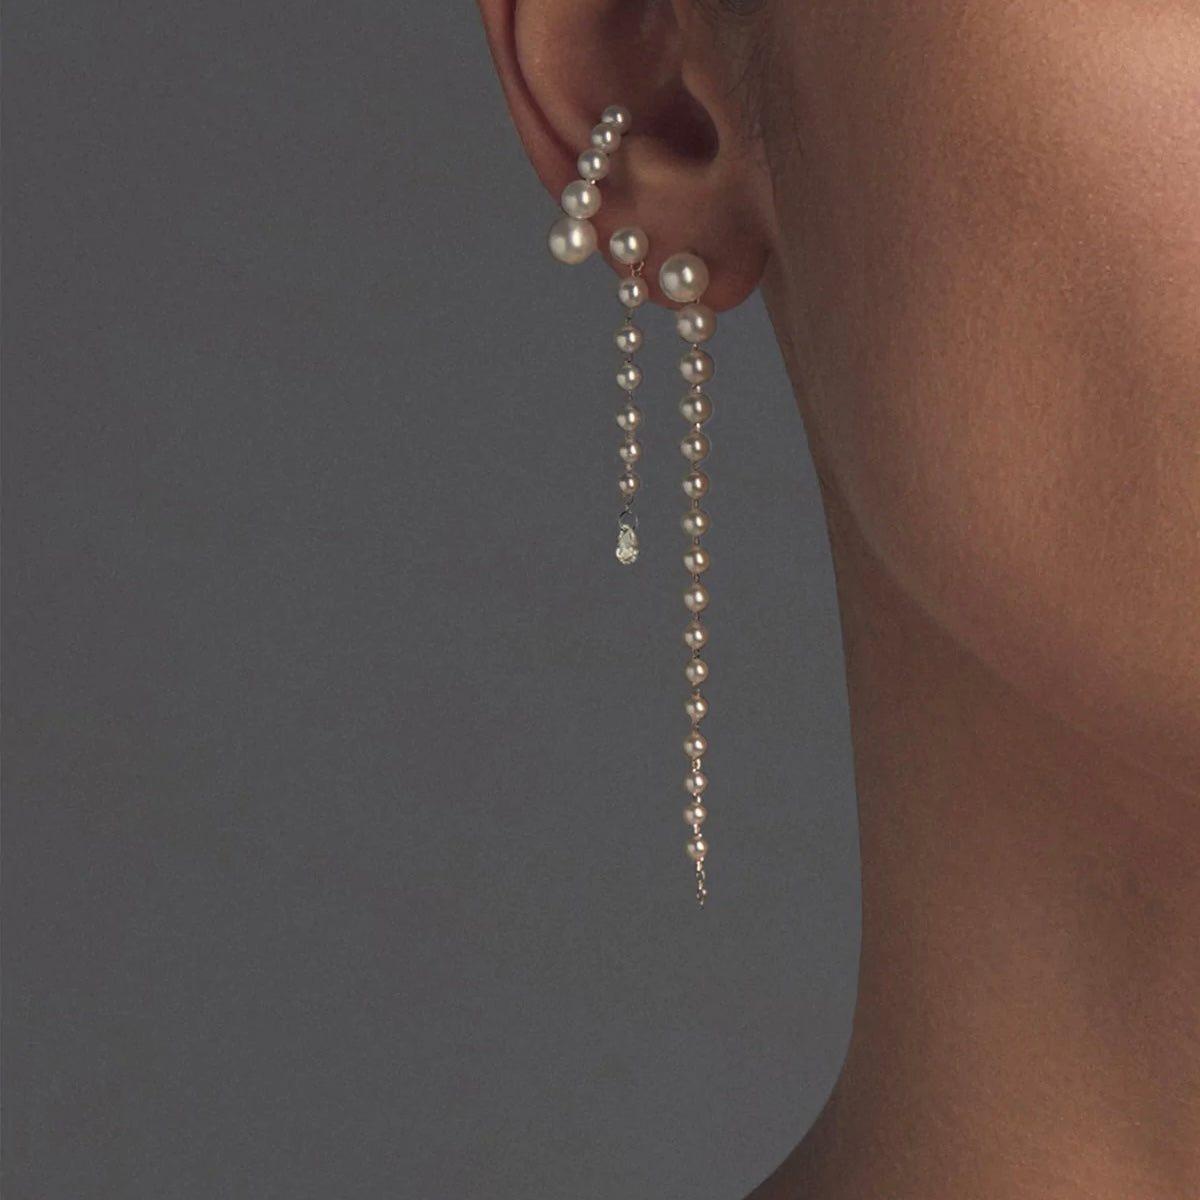 Graduated Pearl Earcuff shown worn with Cascading studs for size reference.